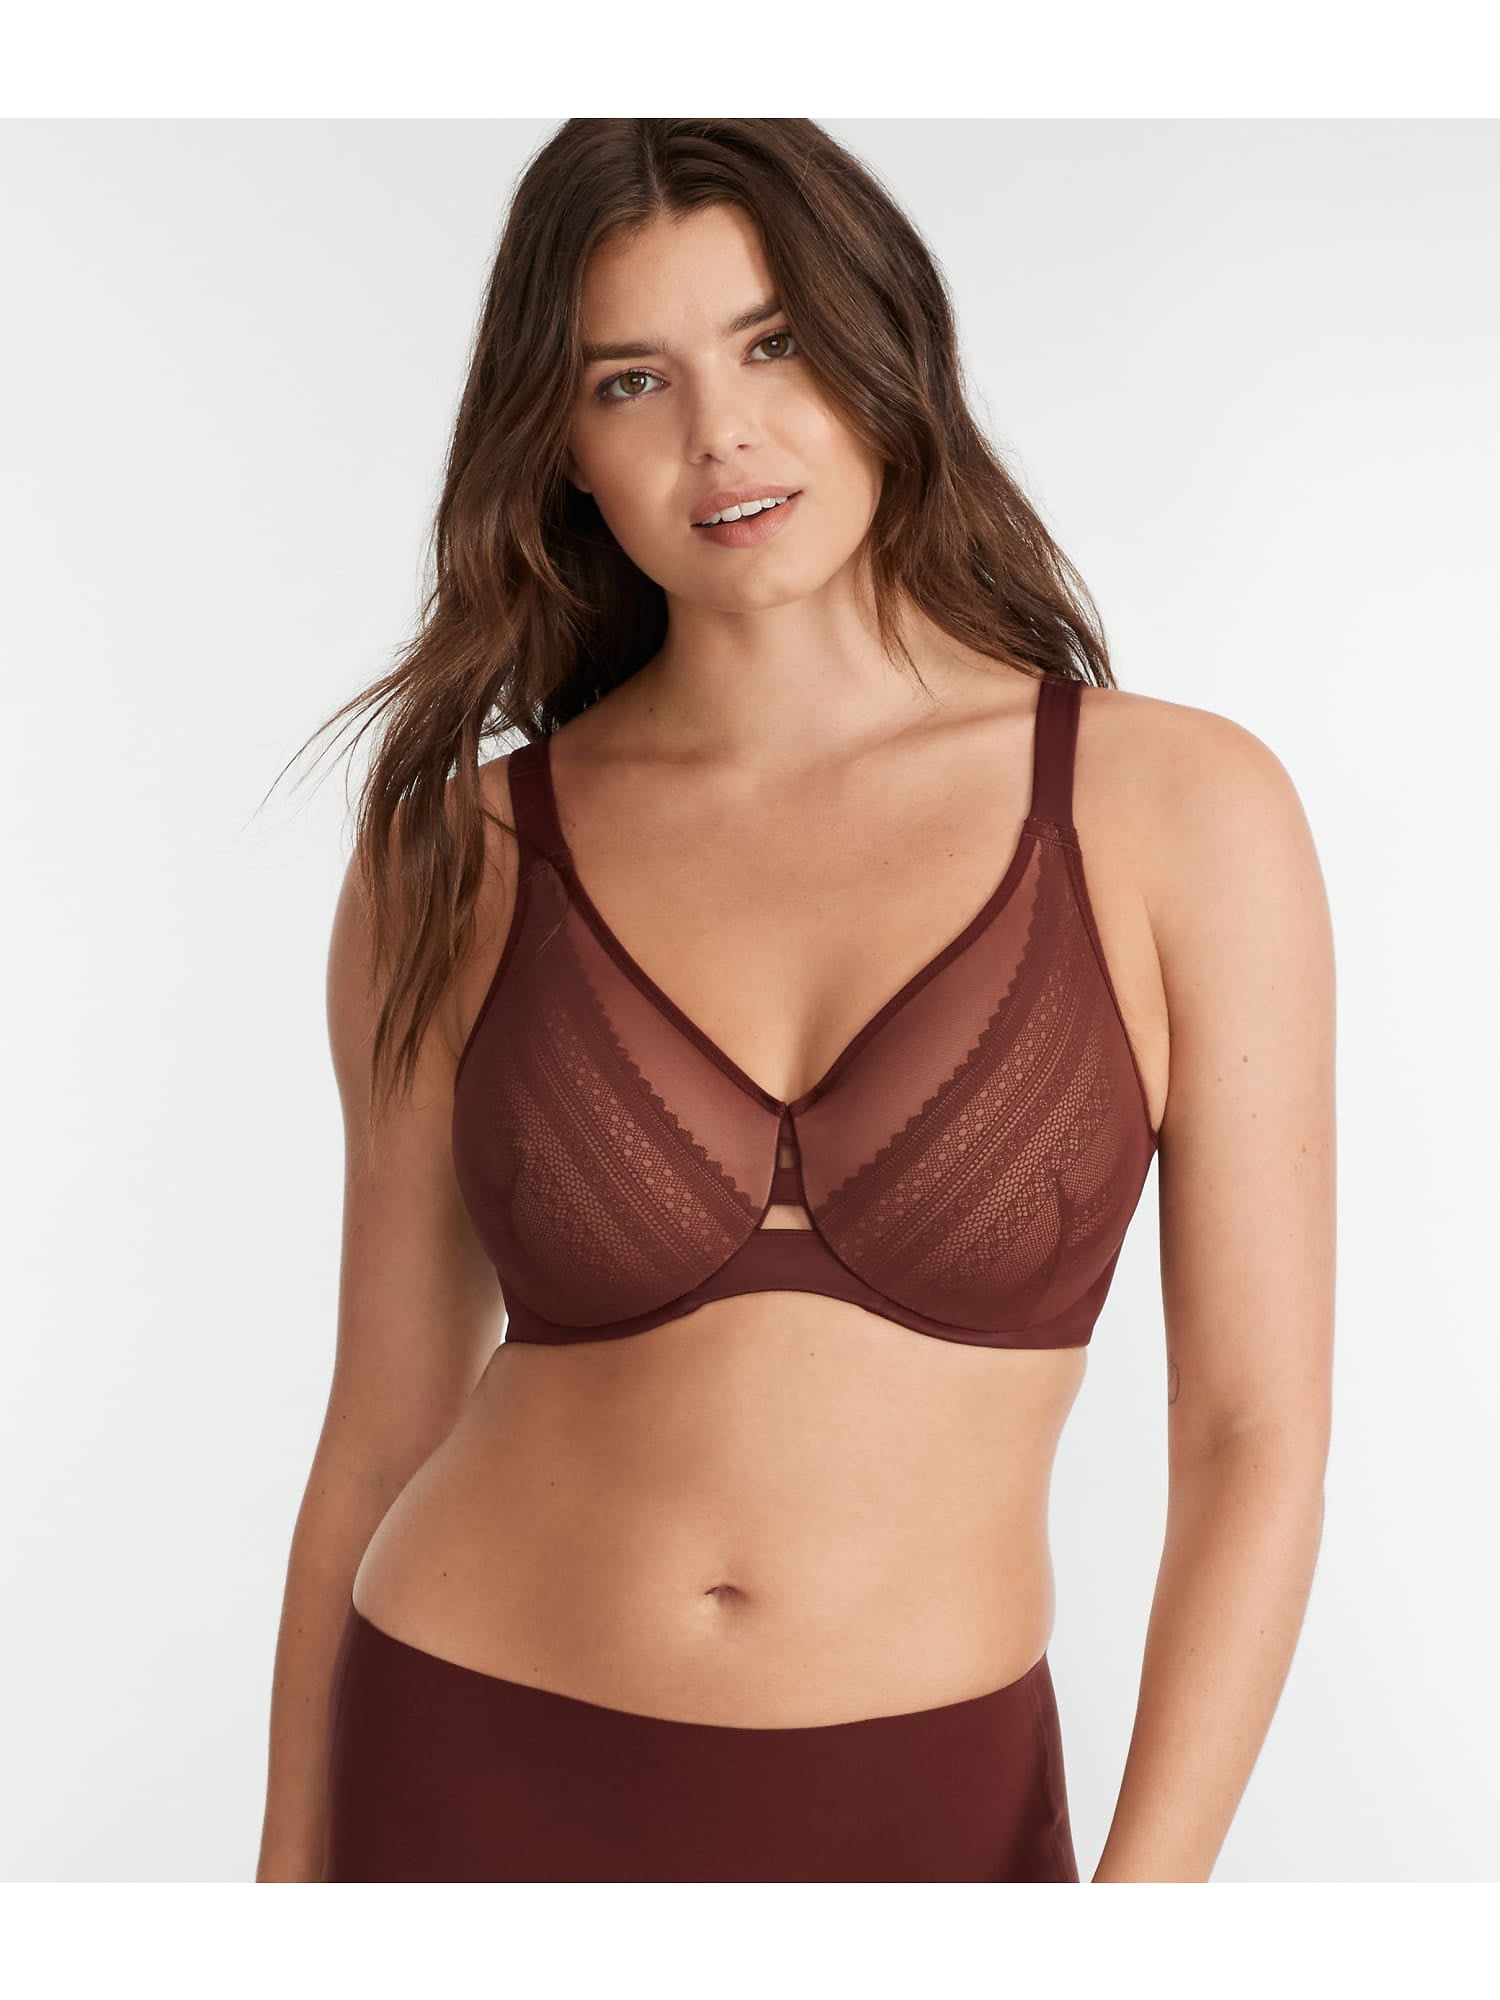 Embroidered Cotton Minmizer Spanx Minimizer Bra For Women Plus Size 1053A,  Comfortable Lingerie In Sizes 36 46 C G 201202 By MiaoErSiDai From Dou01,  $13.39